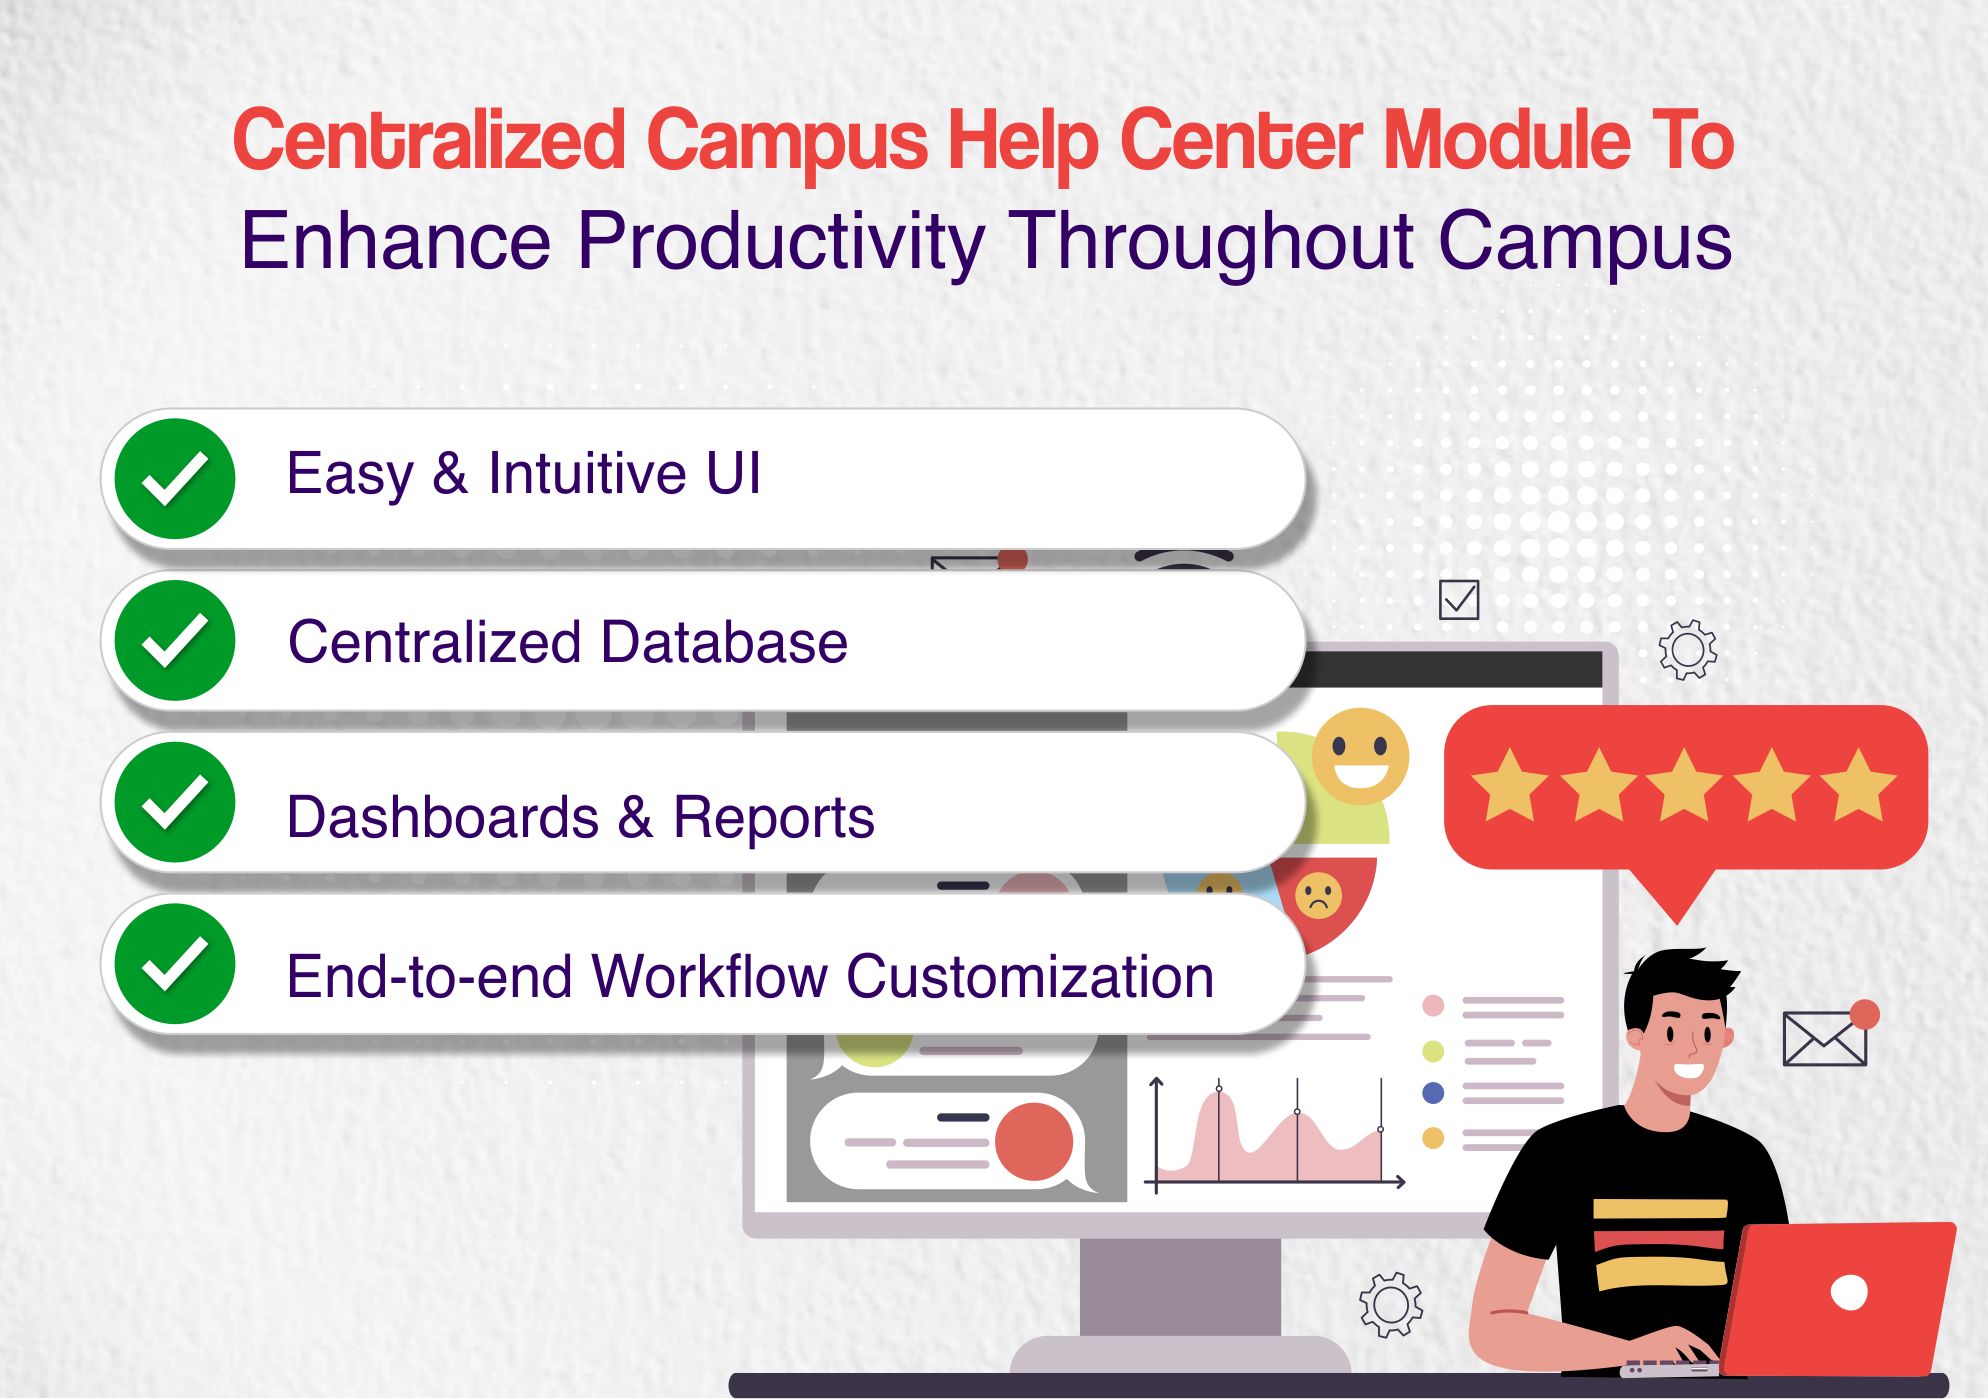 CollPoll's Centralized Campus Help Center Module